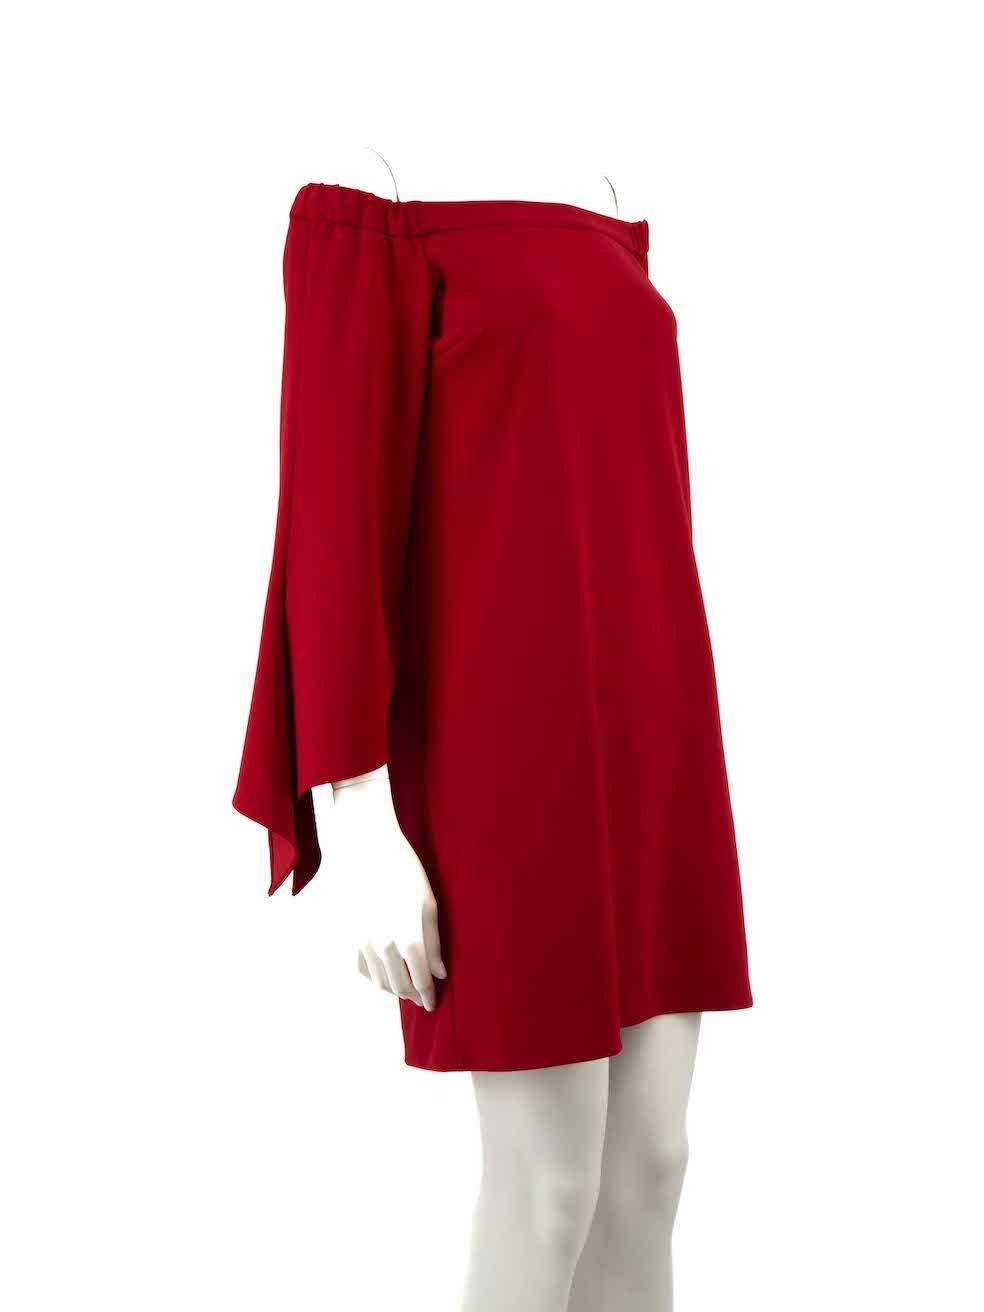 CONDITION is Good. General wear to dress is evident. Moderate signs of wear to both underarm linings, the rear logo tag and the front with discoloured marks on this used Tibi designer resale item.
 
 
 
 Details
 
 
 Red
 
 Polyester
 
 Mini dress
